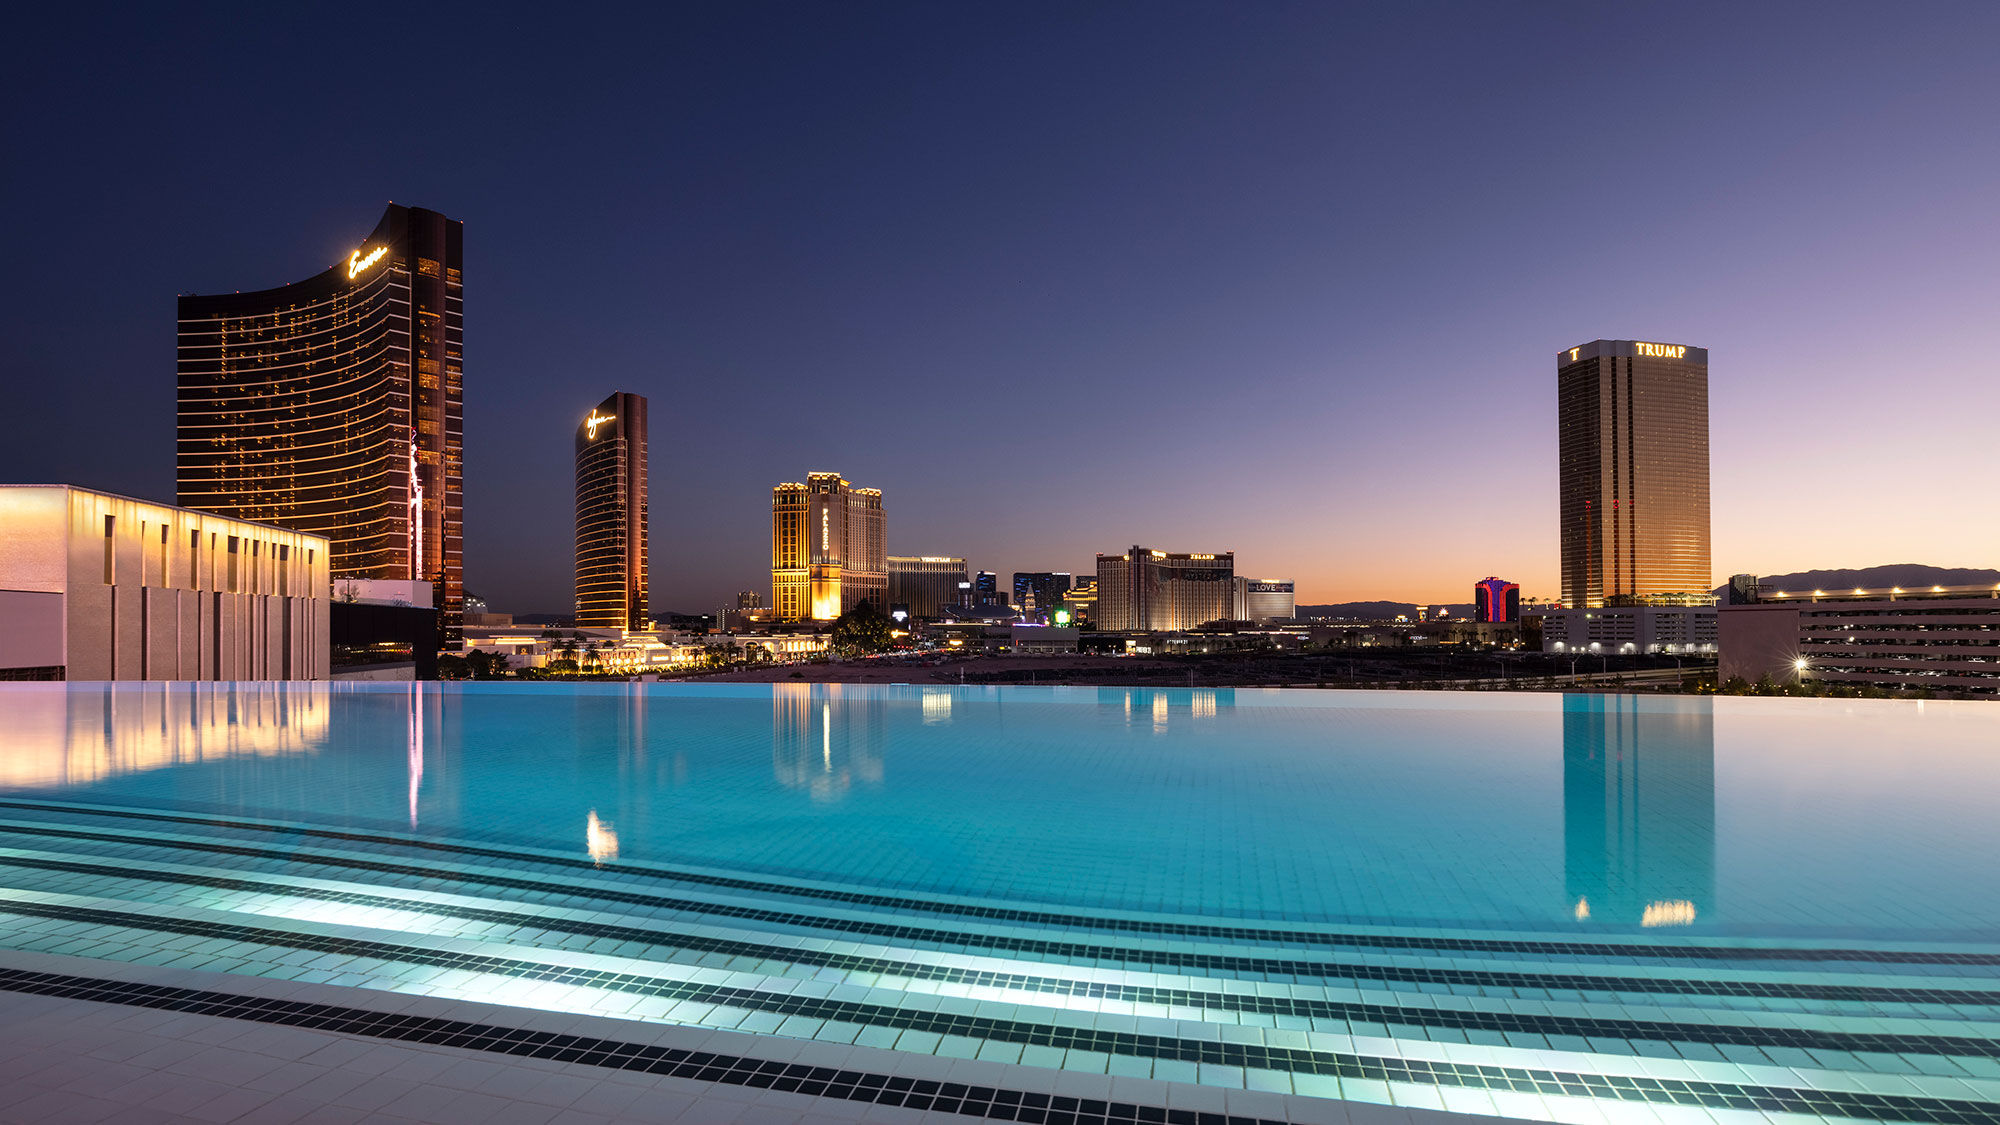 The Athena Infinity Ultra Pool at Resorts World Las Vegas is an adults-only area overlooking the Strip.